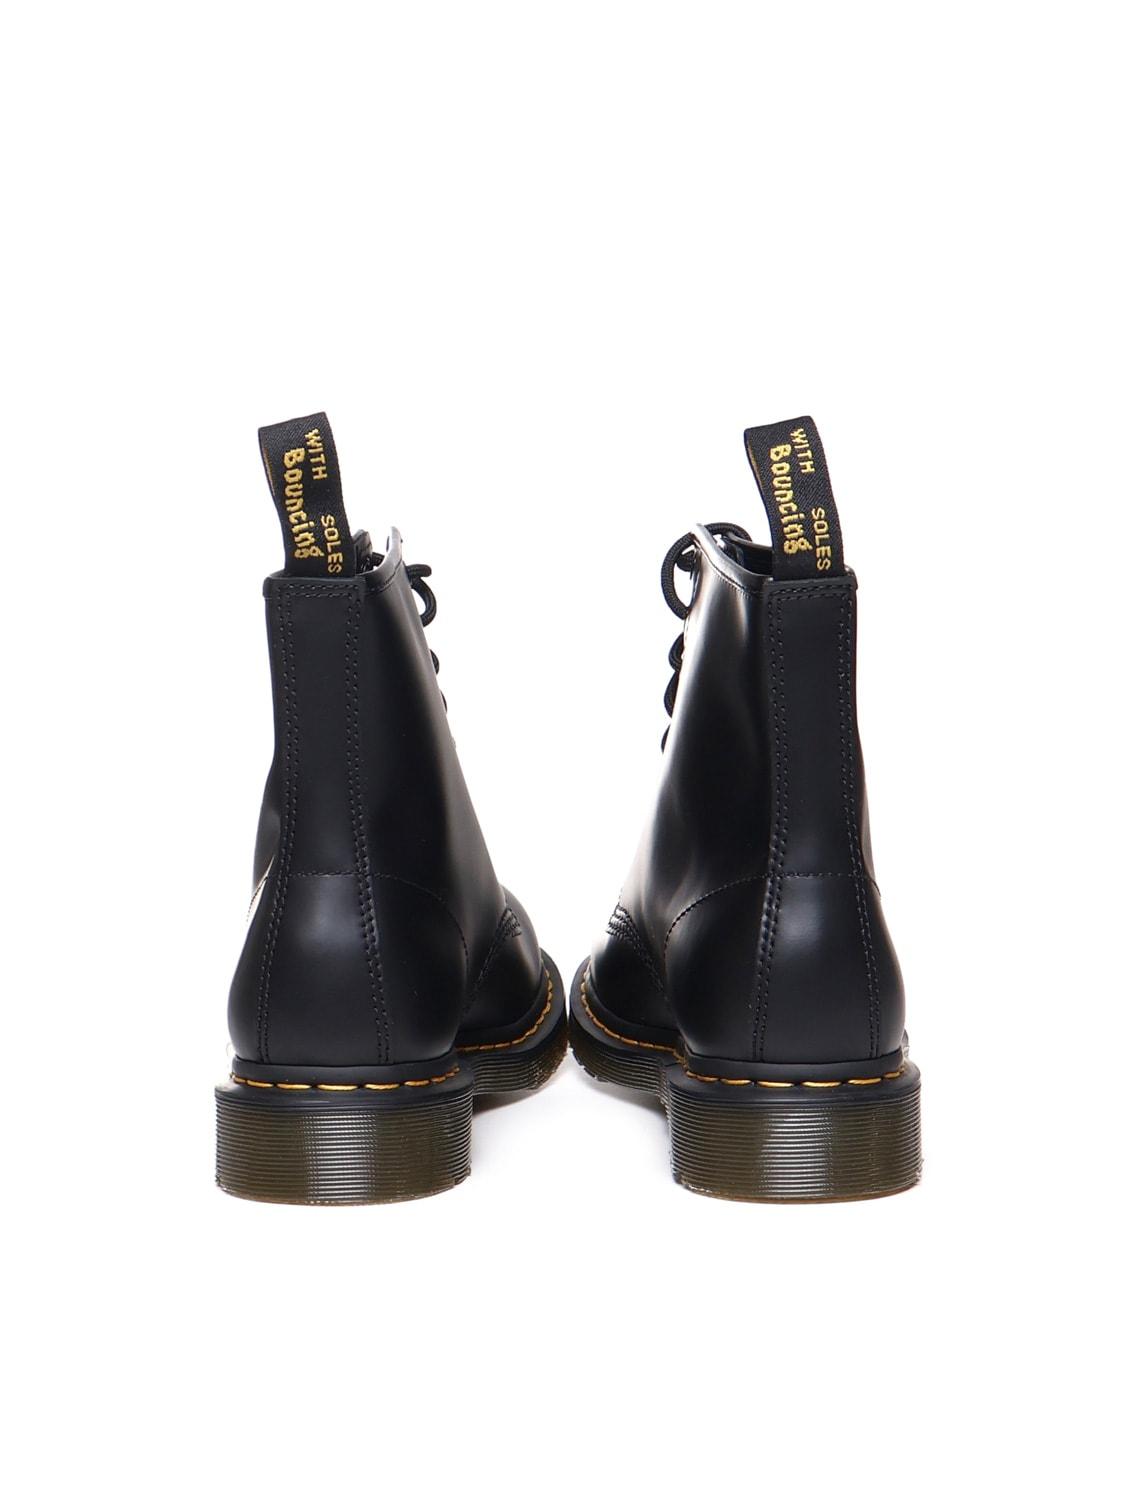 Dr. Martens Bex 1460 Platform Boots In Smooth Leather in Black | Lyst